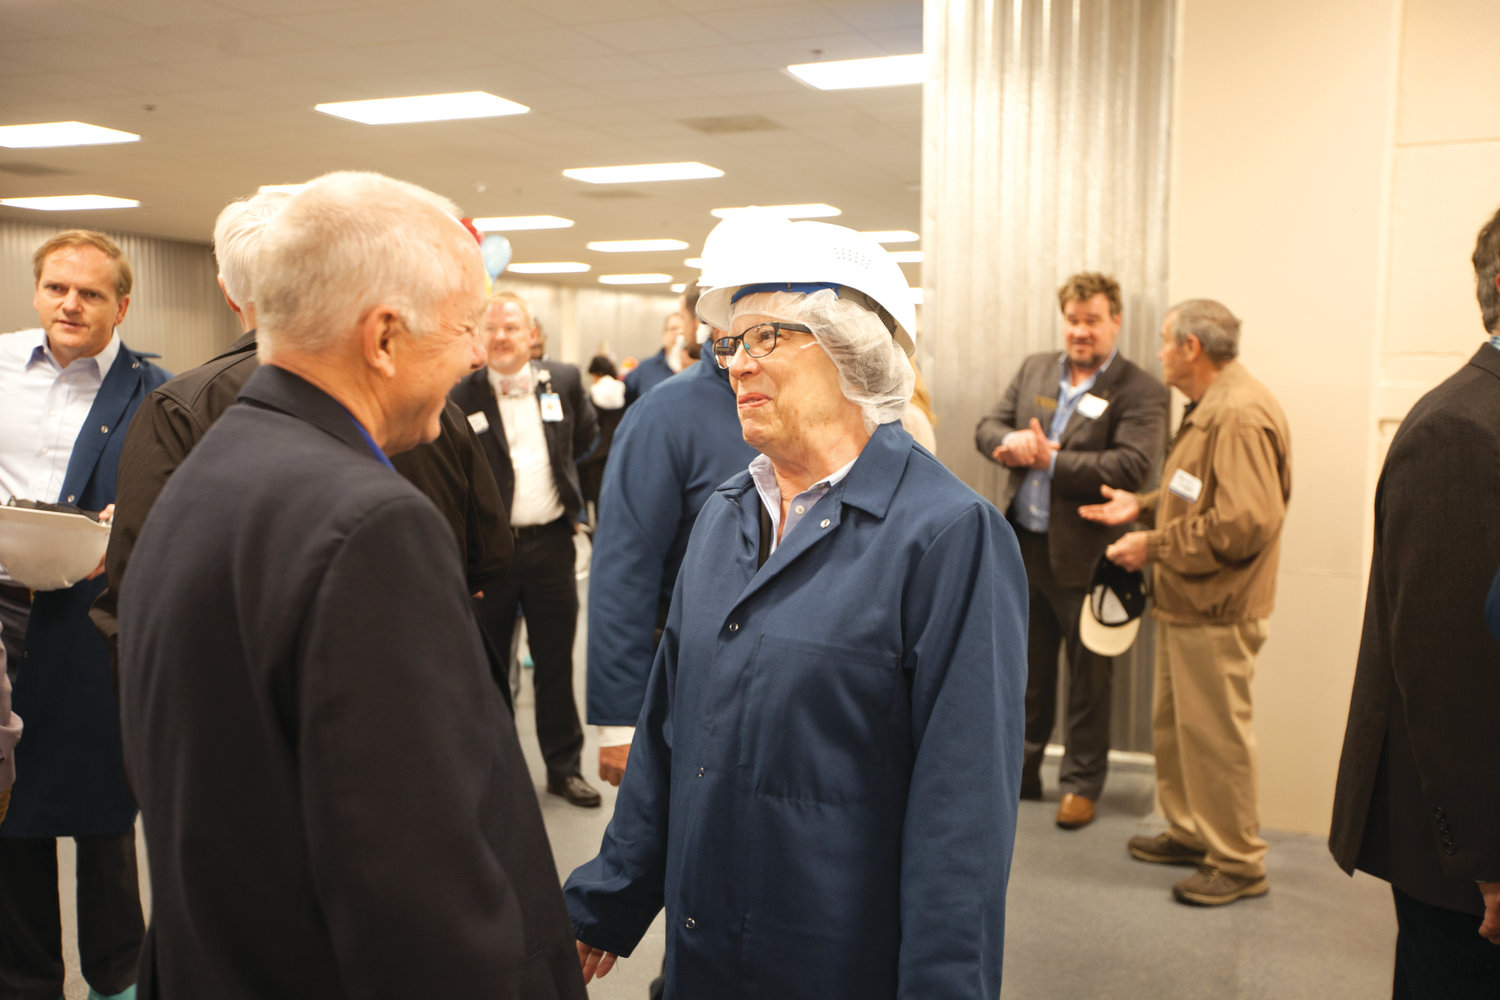 Linda Harris and Bob Kenney shared a few moments during the ribbon cutting at the new Mountaire plant in Siler City on April 16.